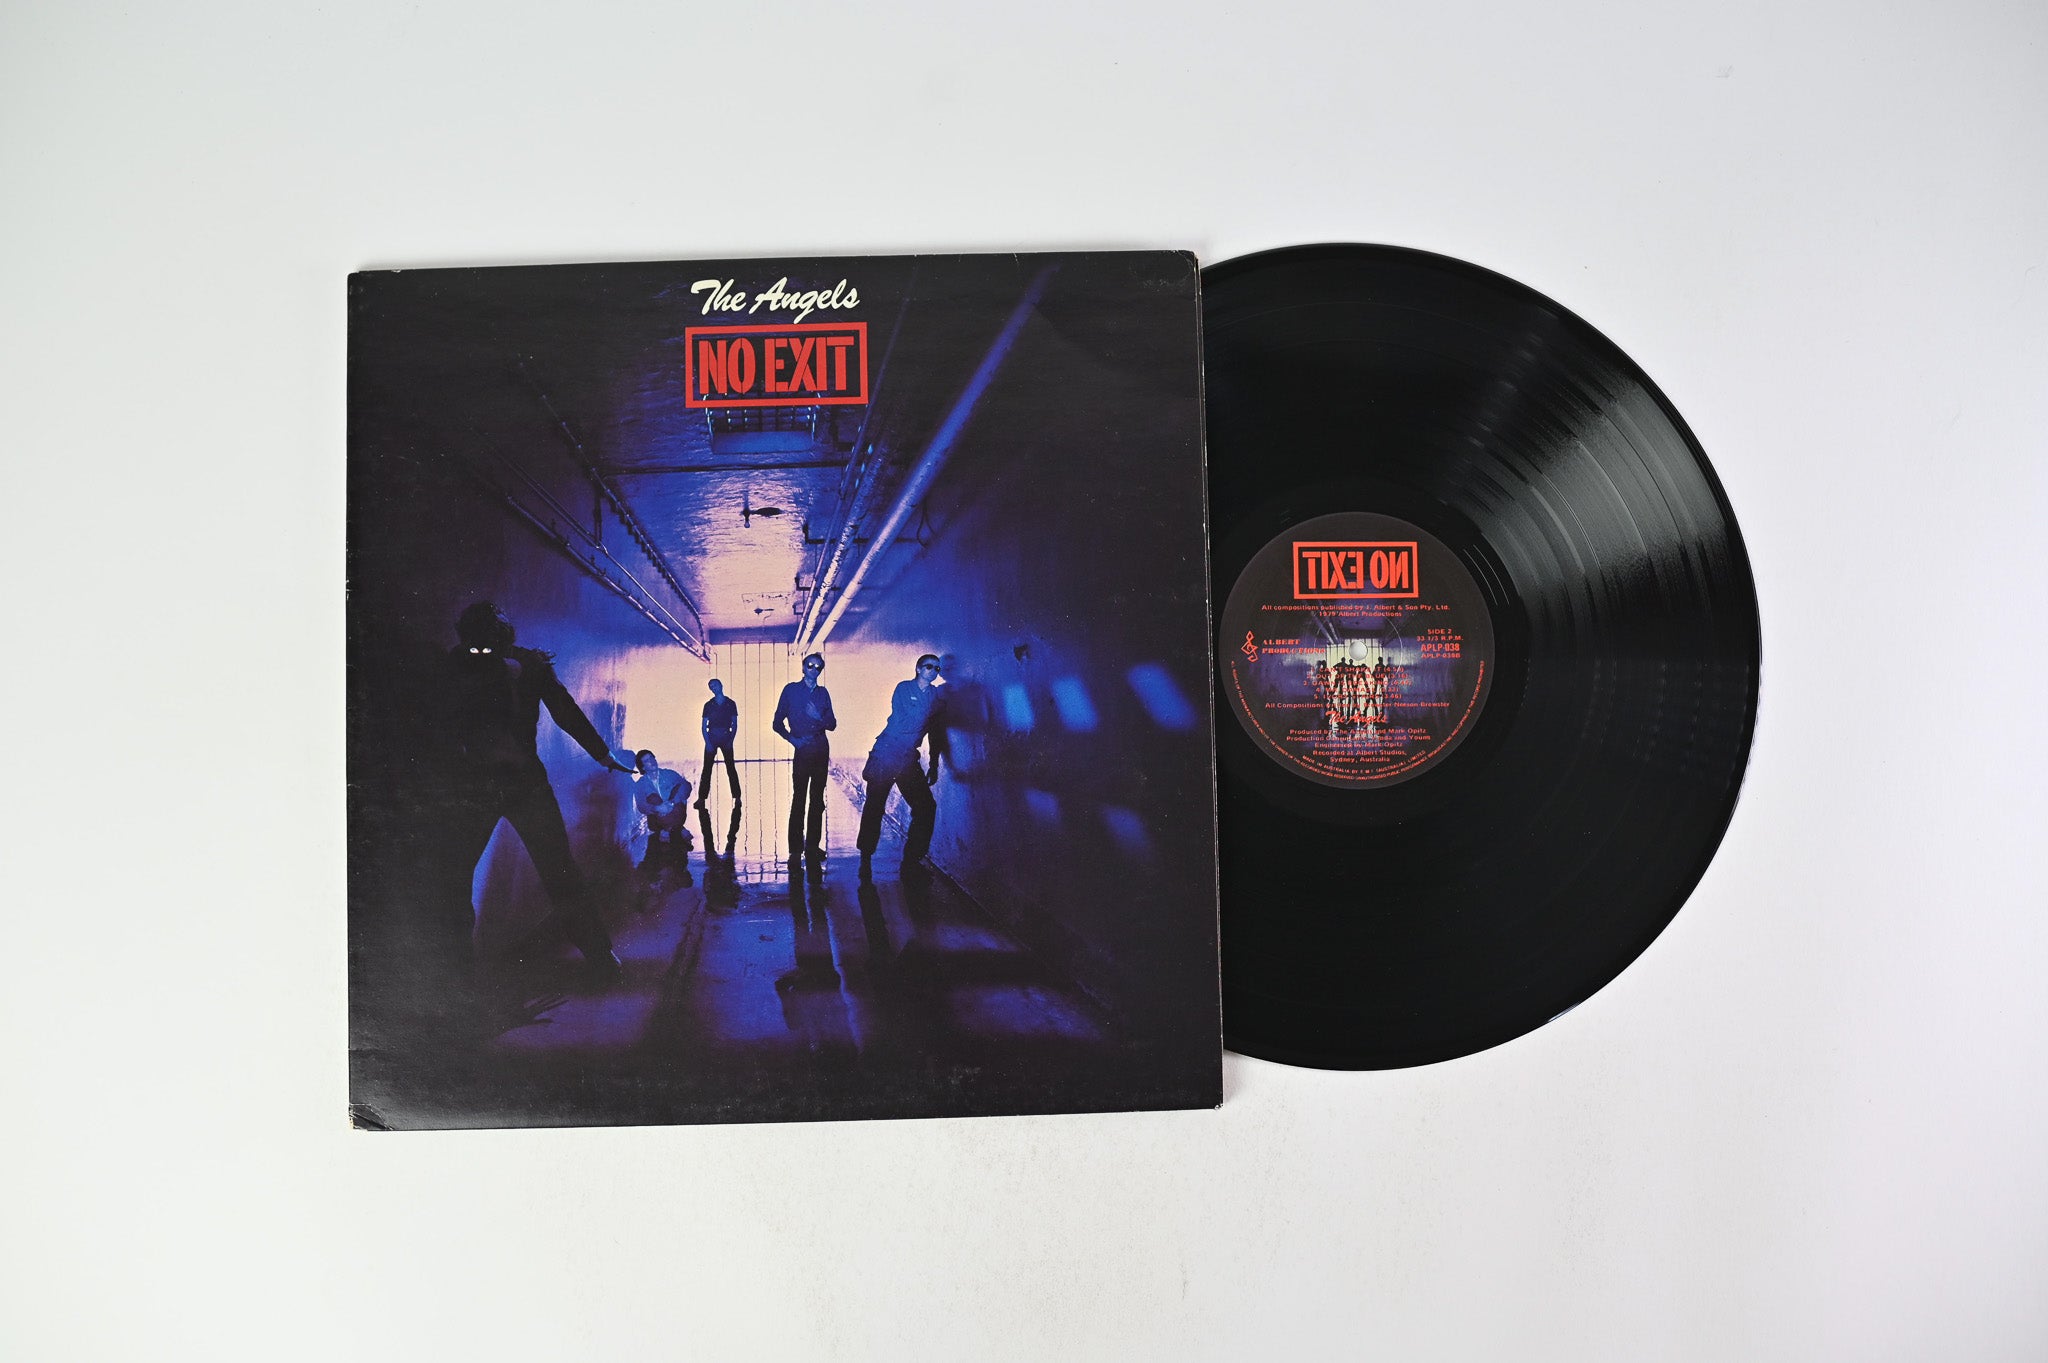 The Angels - No Exit on Albert Productions Australian Pressing